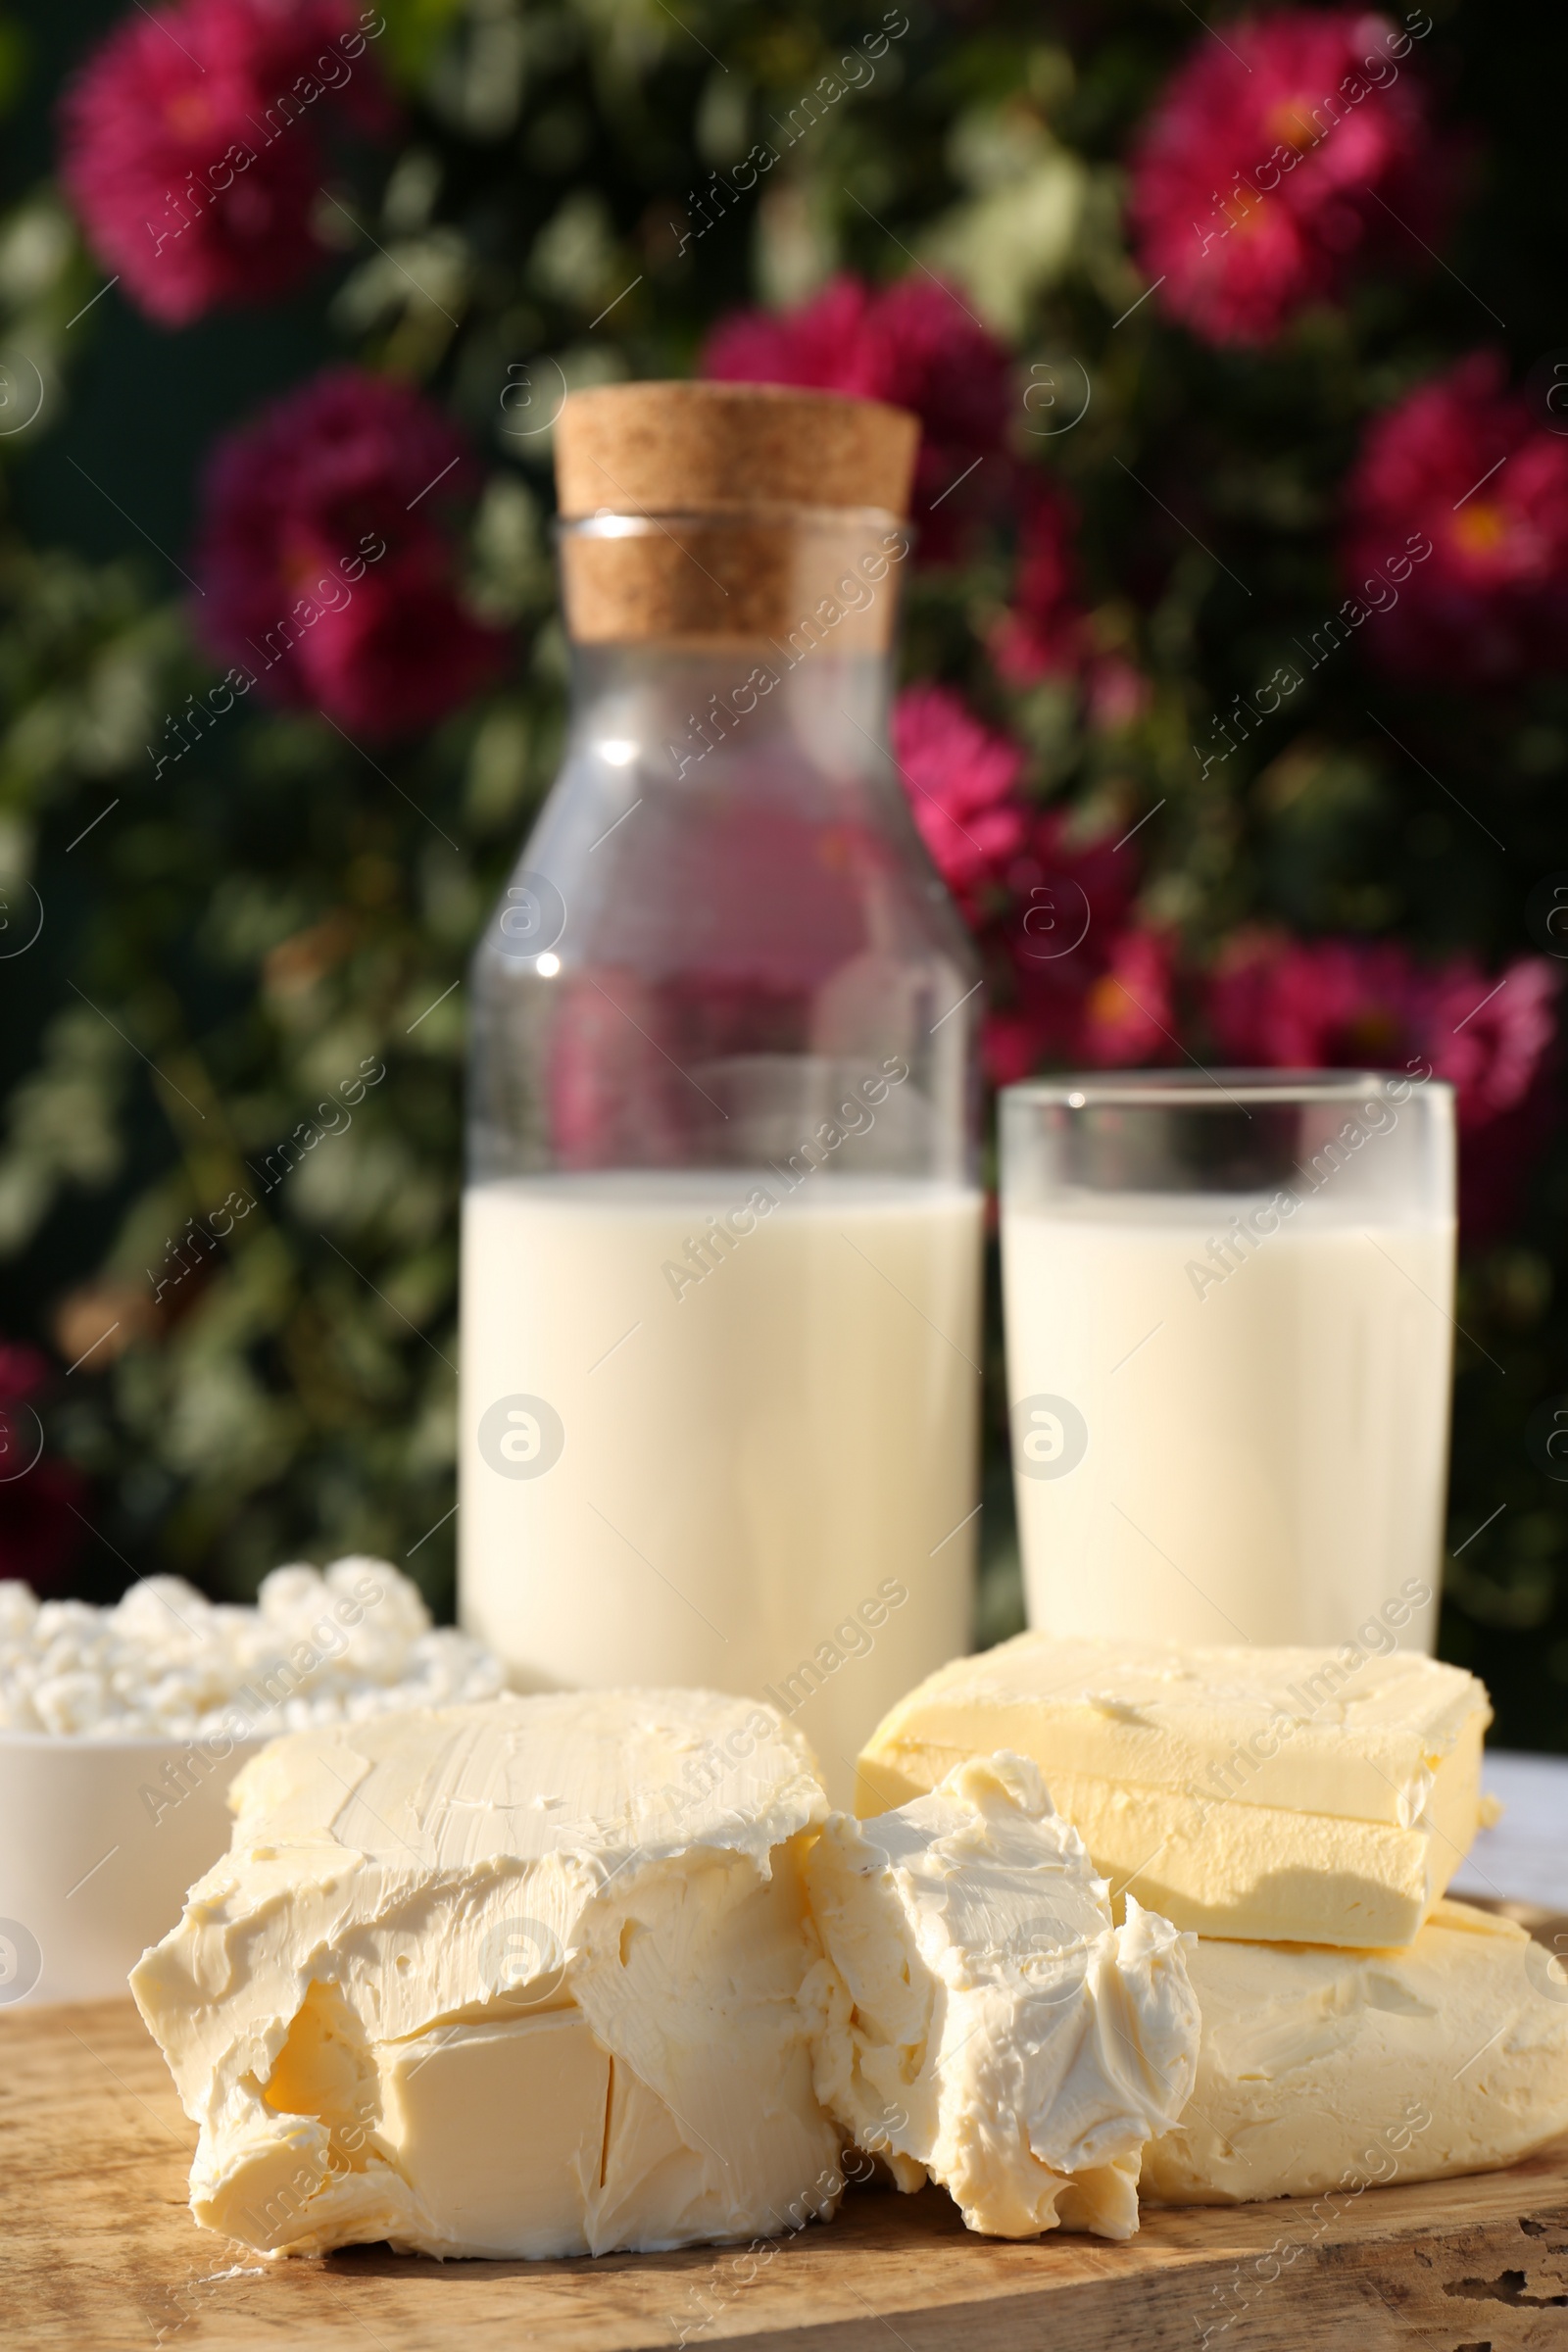 Photo of Tasty homemade butter and dairy products on white wooden table outdoors